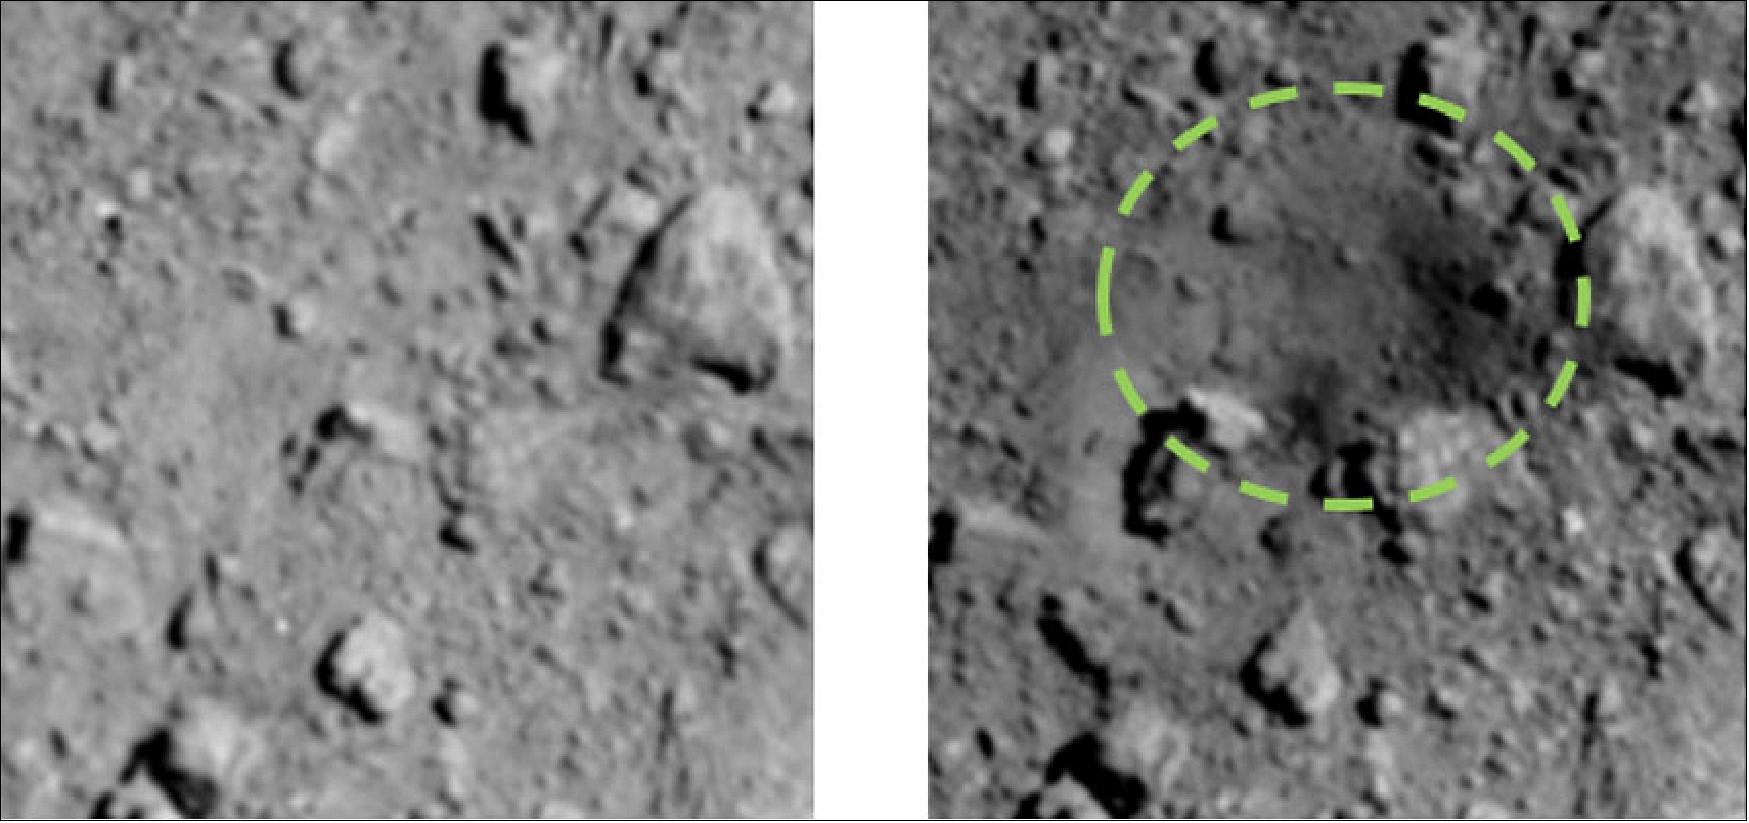 Figure 58: ONC-T images. The left image was acquired on 22 March 2019. The right image was acquired on 25 April 2019. By comparing the two images, we have confirmed that an artificial crater was created in the area surrounded by dotted lines. The size and depth of the crater are now under analysis (image credit: JAXA, The University of Tokyo, Kochi University, Rikkyo University, Nagoya University, Chiba Institute of Technology, Meiji University, The University of Aizu, AIST)